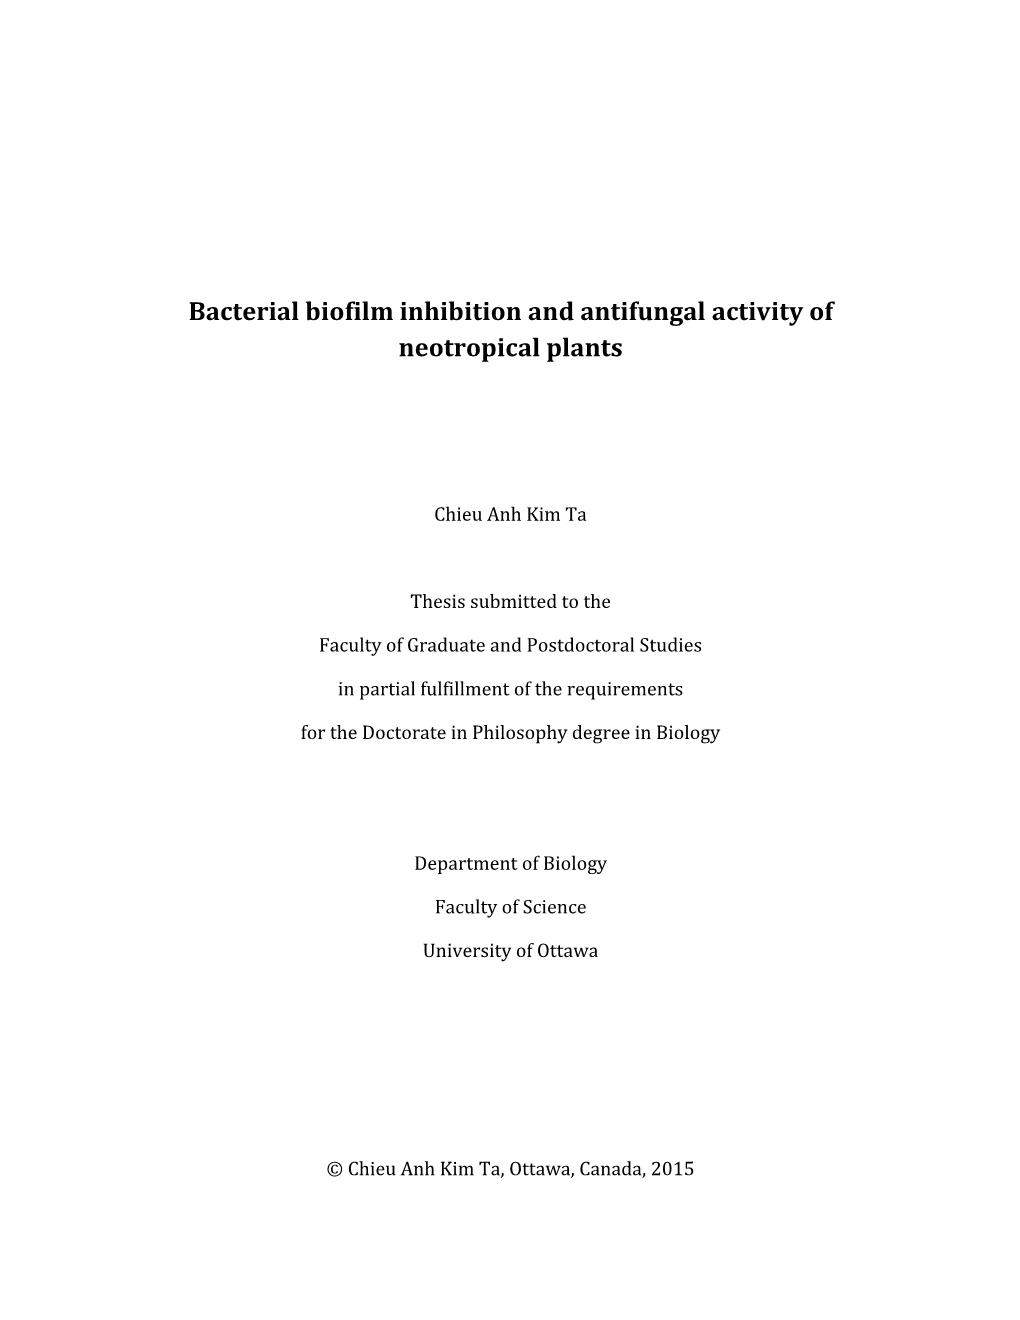 Bacterial Biofilm Inhibition and Antifungal Activity of Neotropical Plants